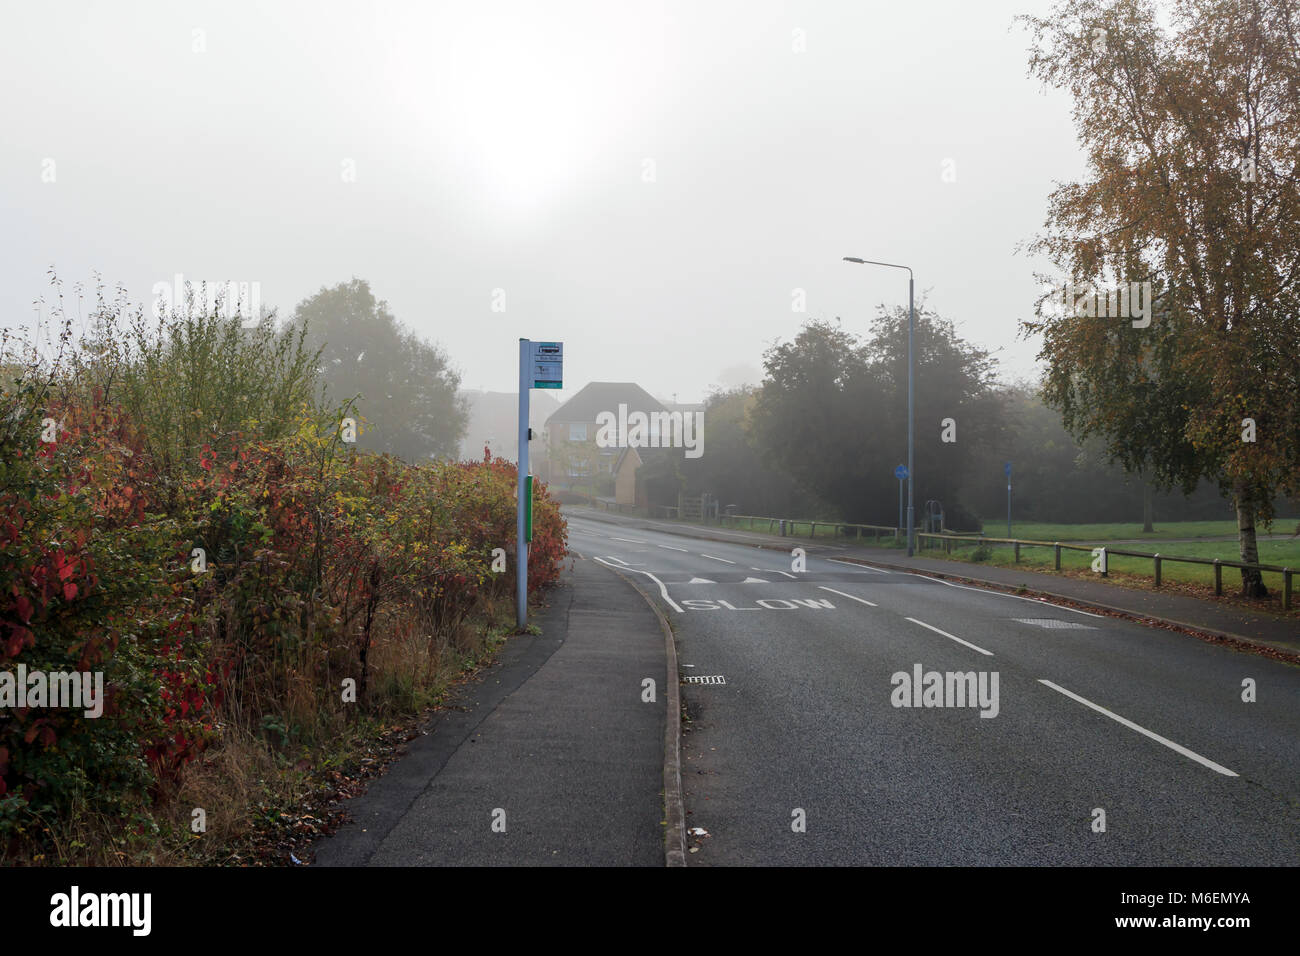 UK village road with speed humps, trees, bushes and houses in the distance Stock Photo